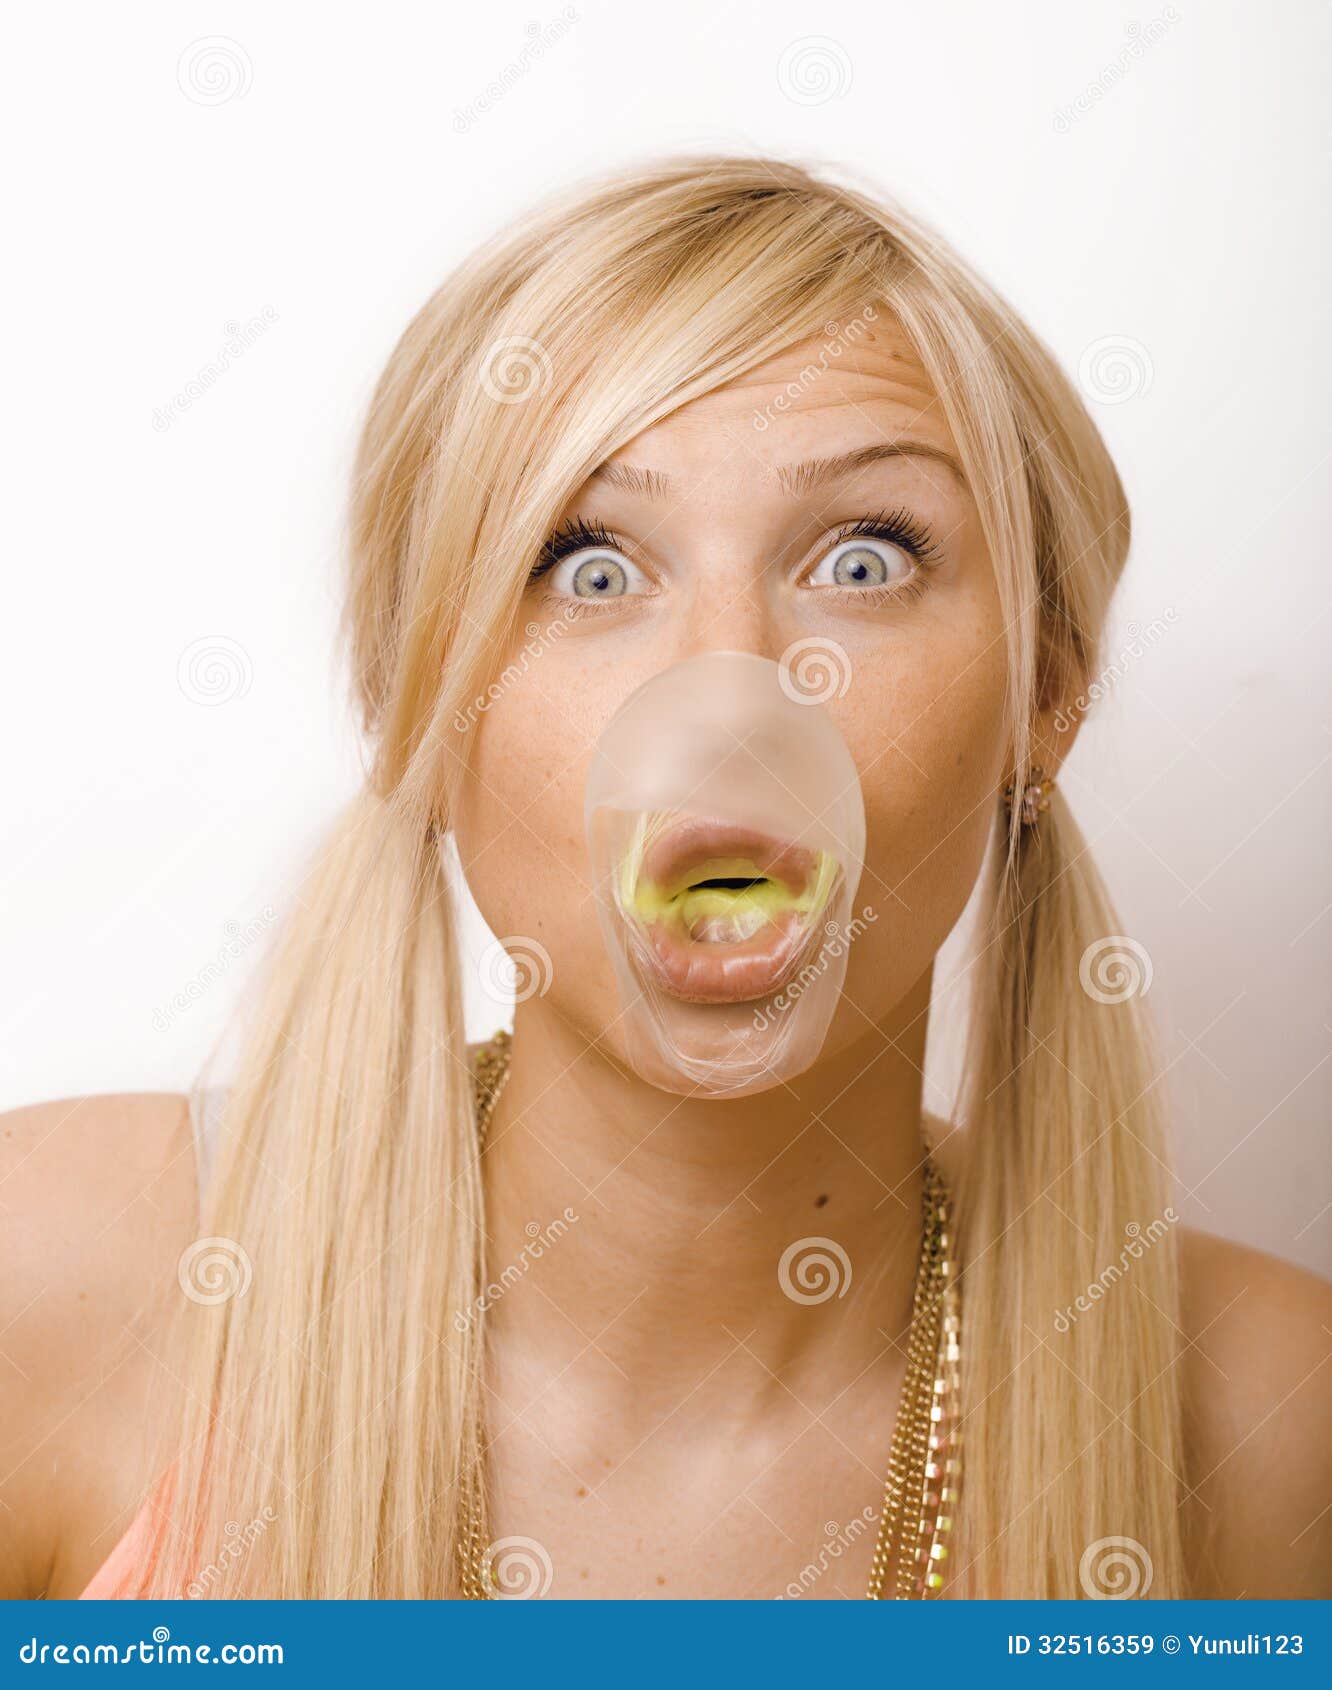 Pretty Blond Woman Blowing Gum Bubbles Stock Image Image Of Making Lifestyle 32516359